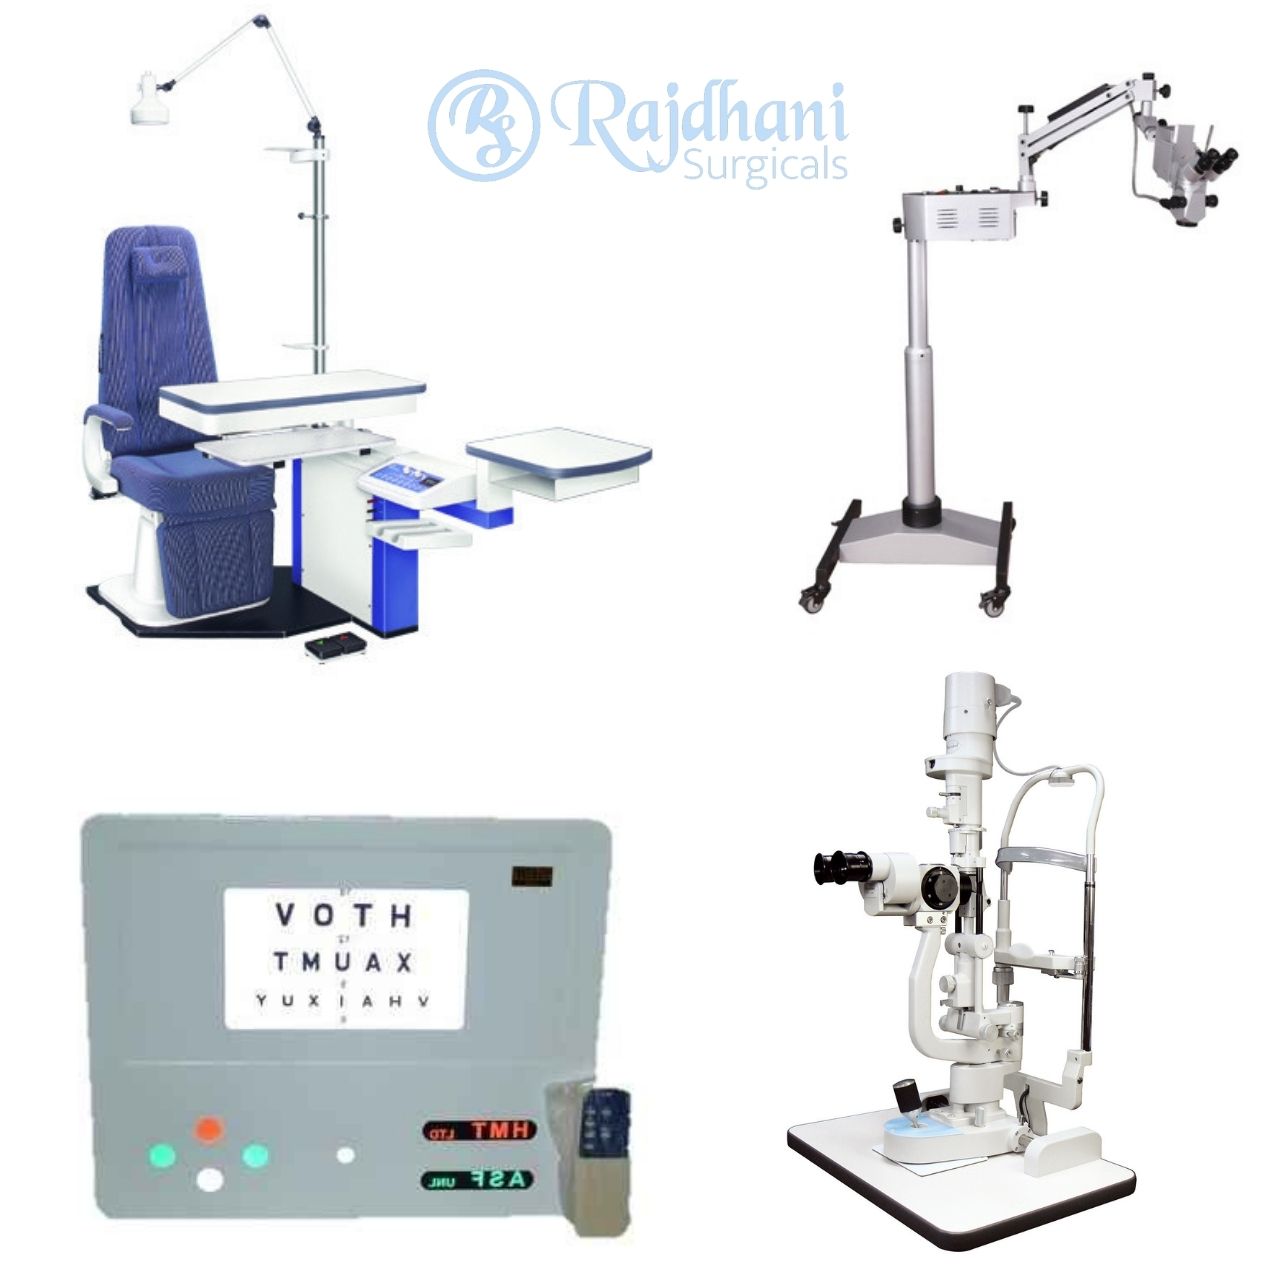 Ophthalmic Surgery Equipment Manufacturer in Delhi